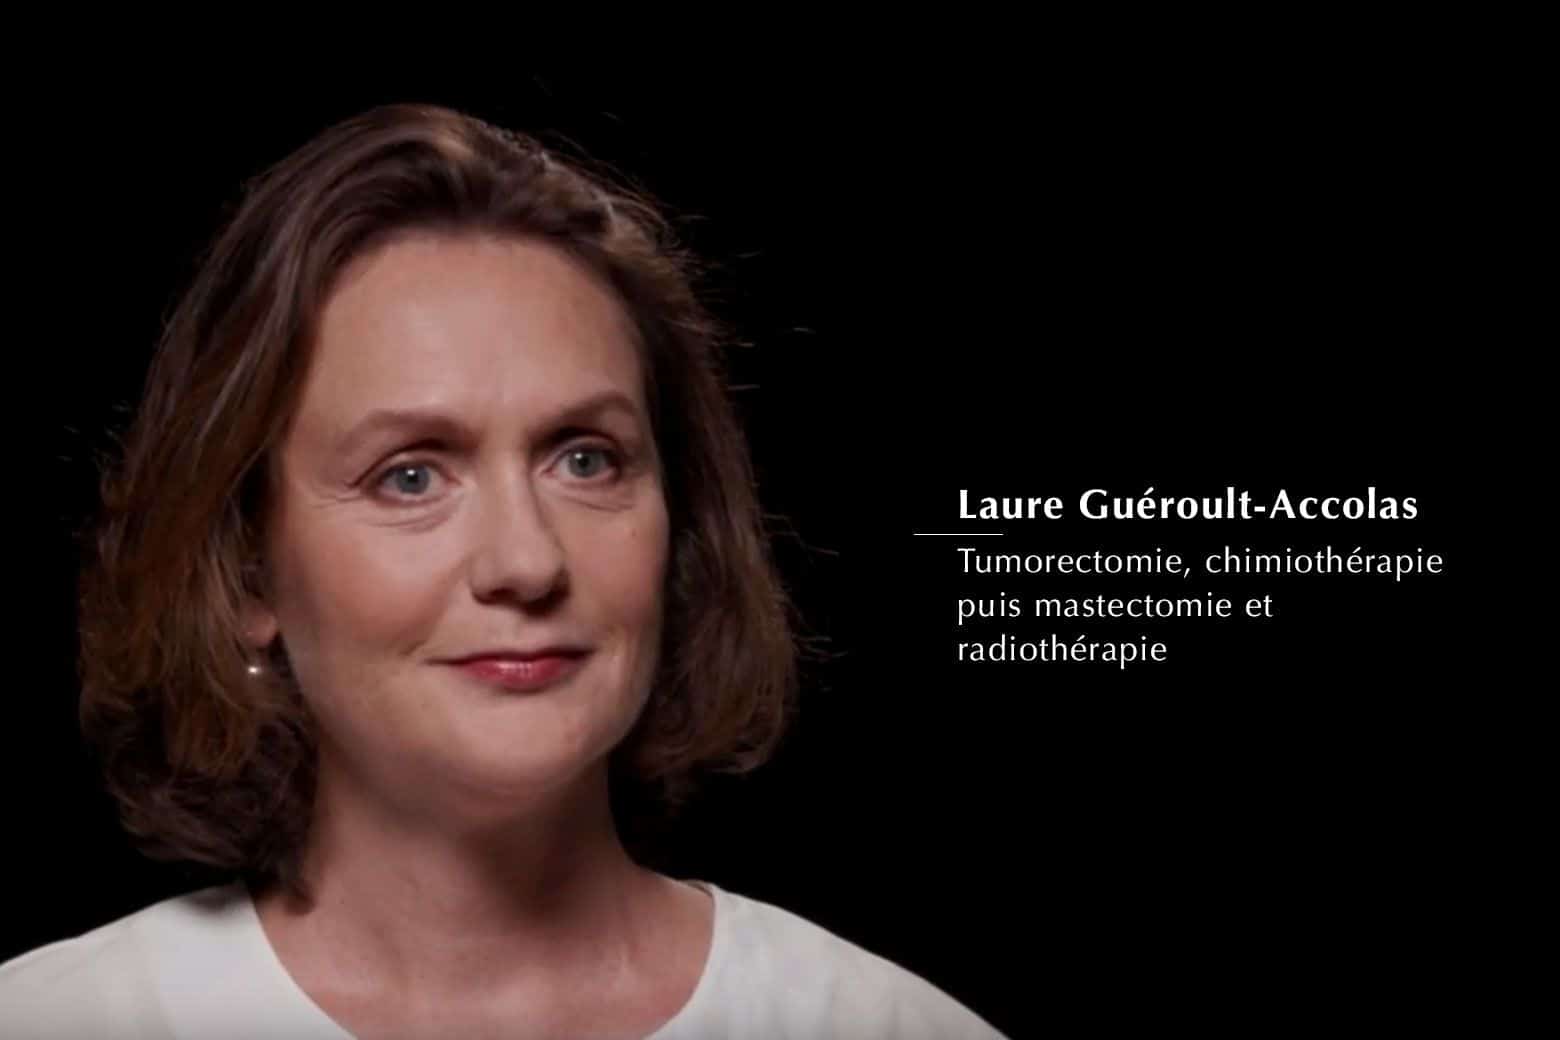 LAURE GUÉROULT-ACCOLAS - Tumorectomy, chemotherapy then mastectomy and radiotherapy in 2009